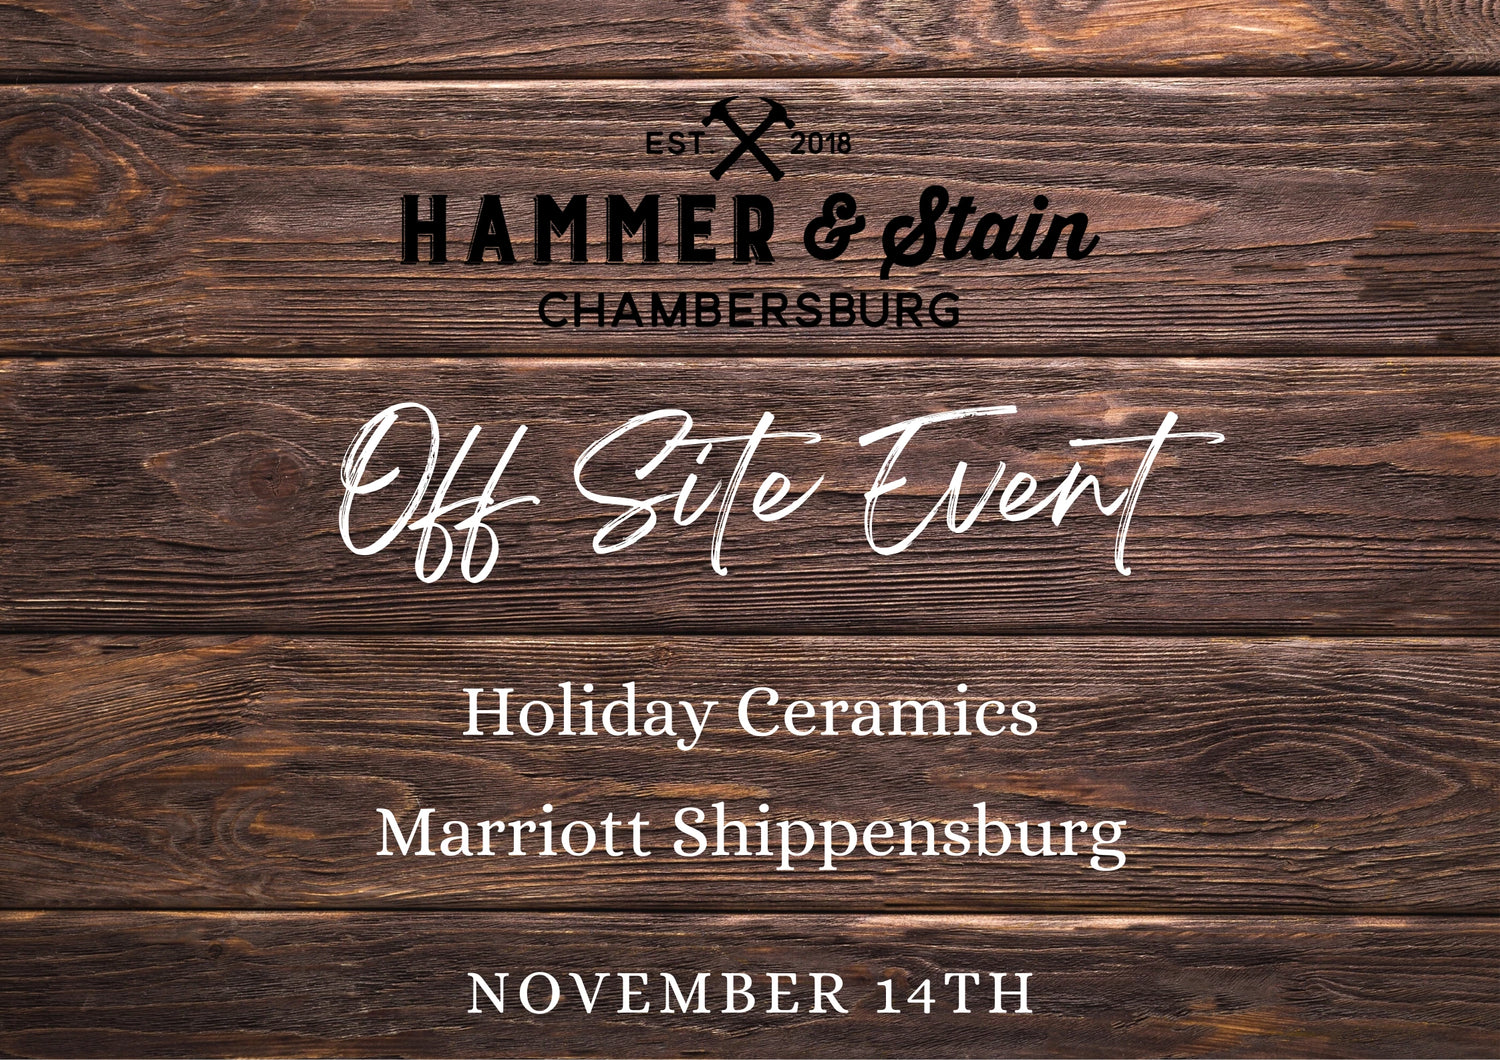 11/14/23 Vintage Holiday Ceramics at The Courtyard Marriot Shippensburg 6pm